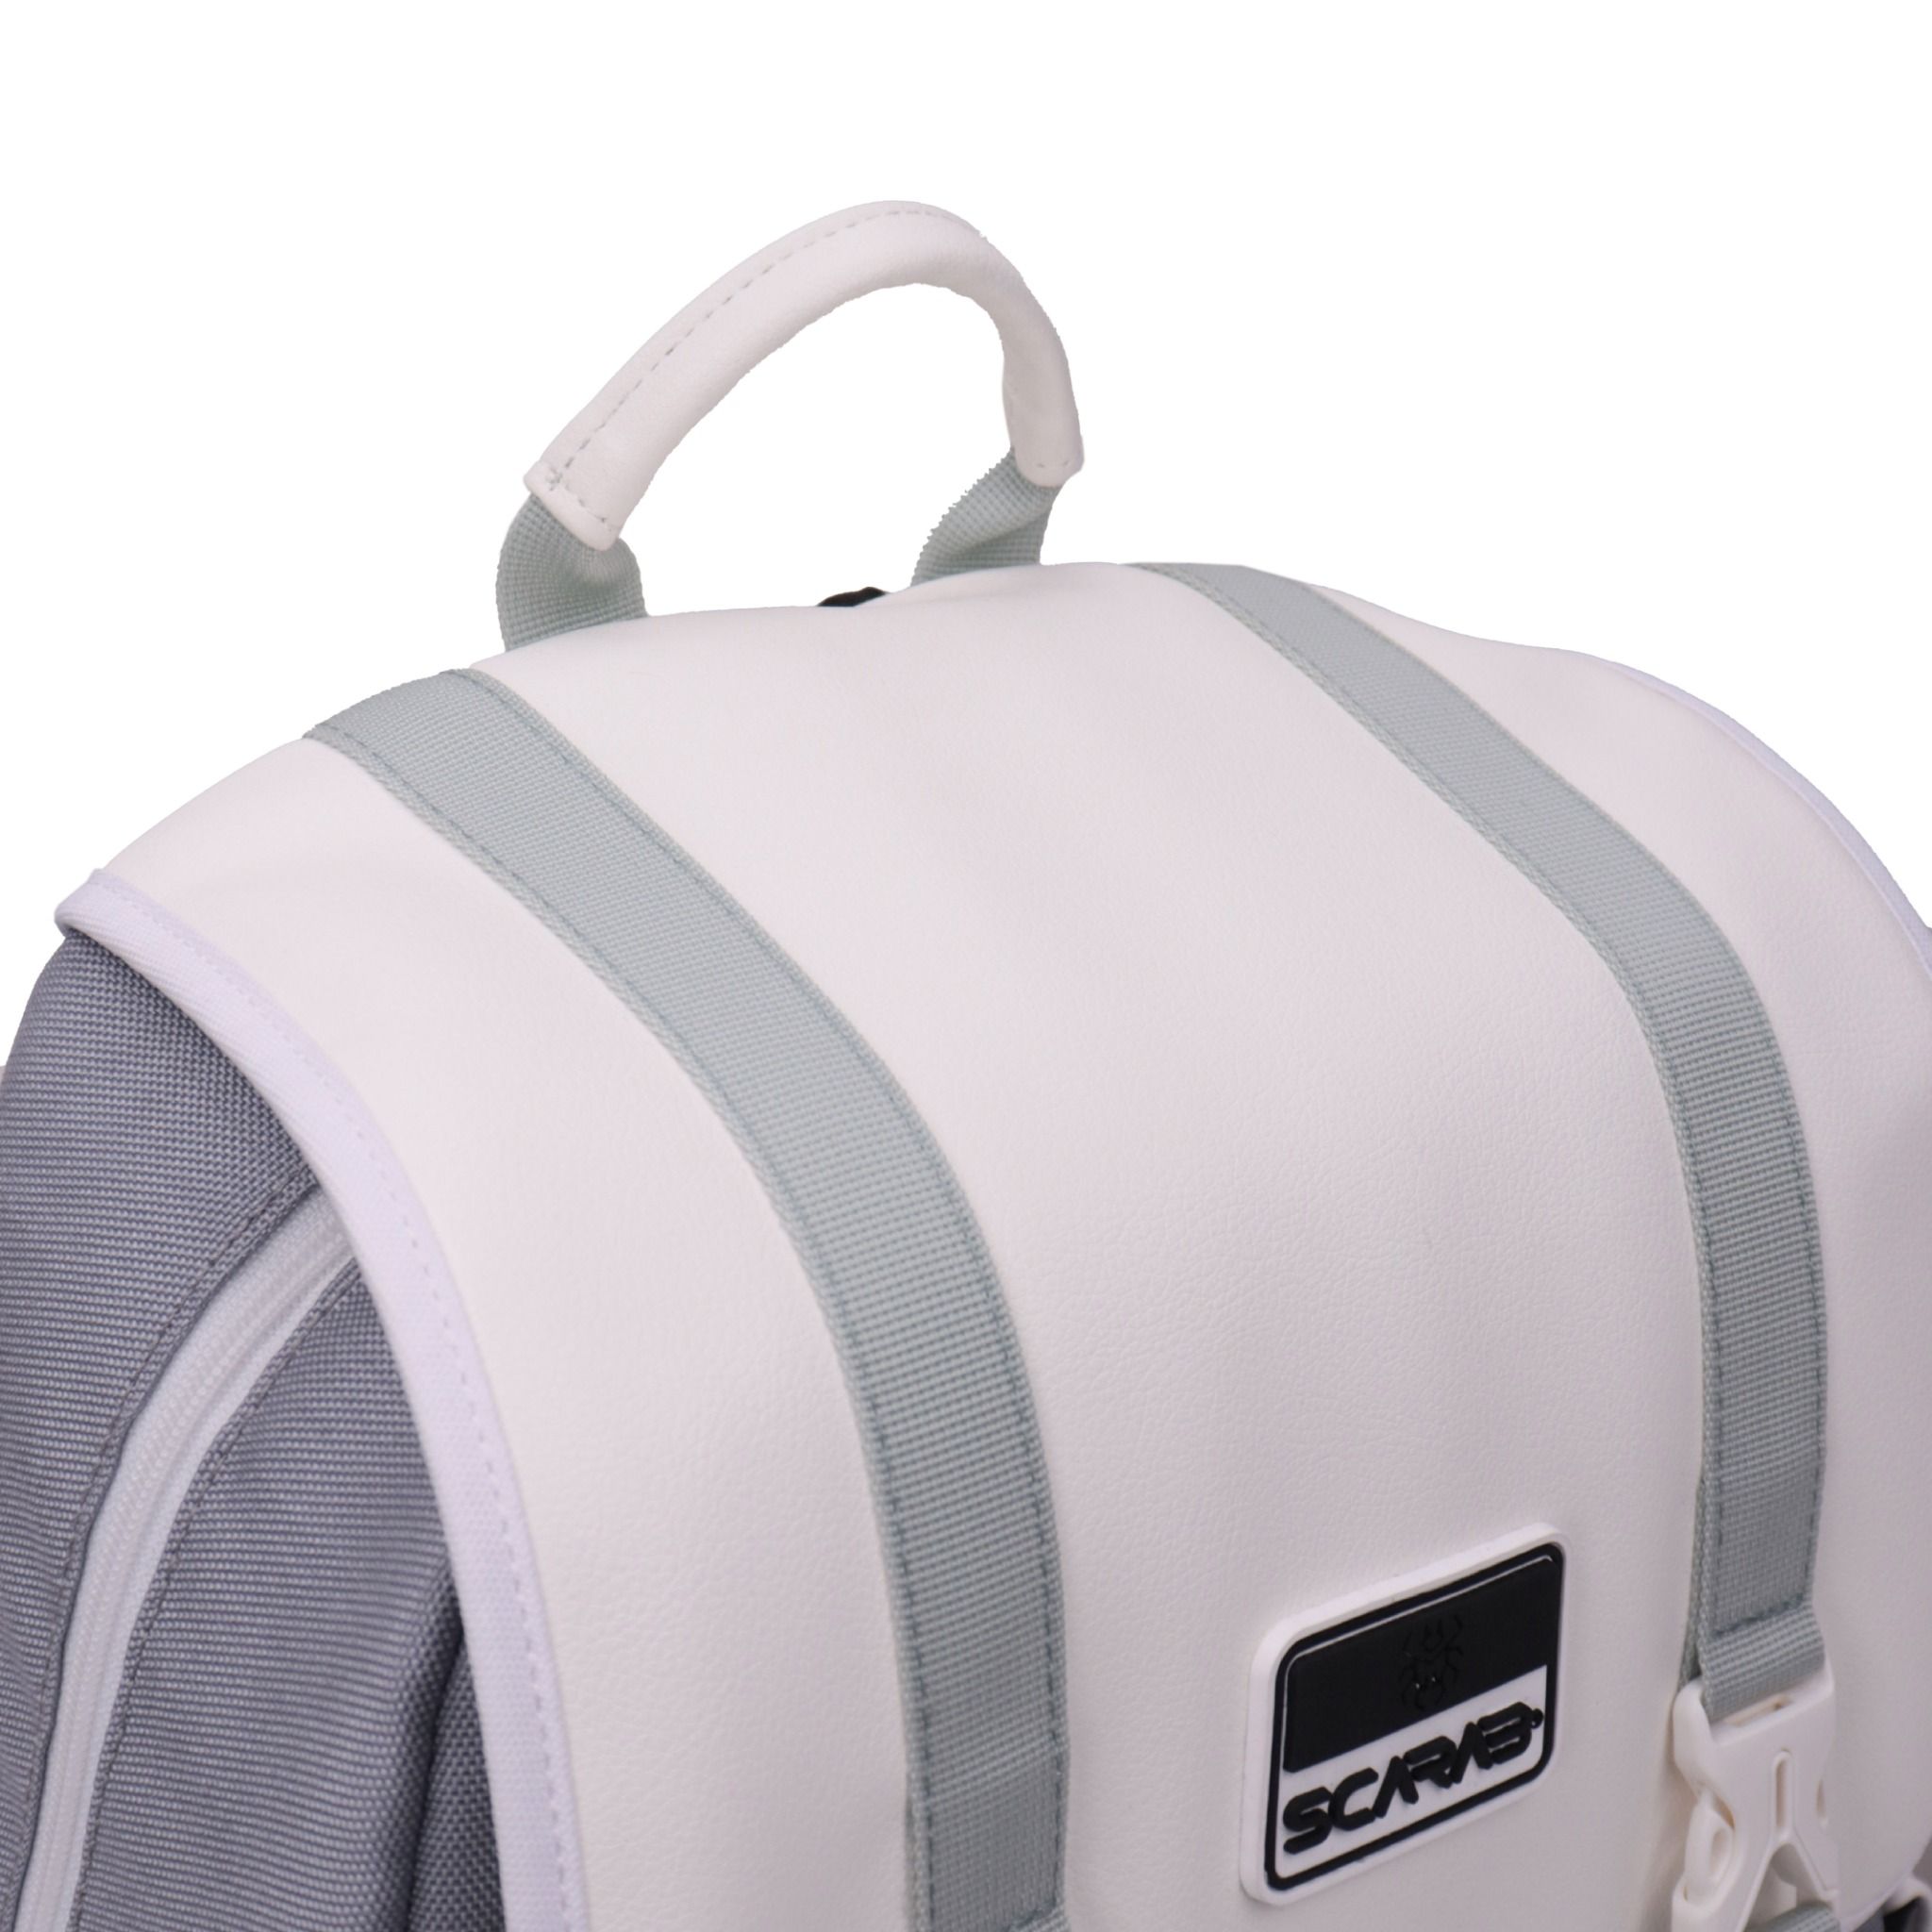  Passion Backpack - Grey 